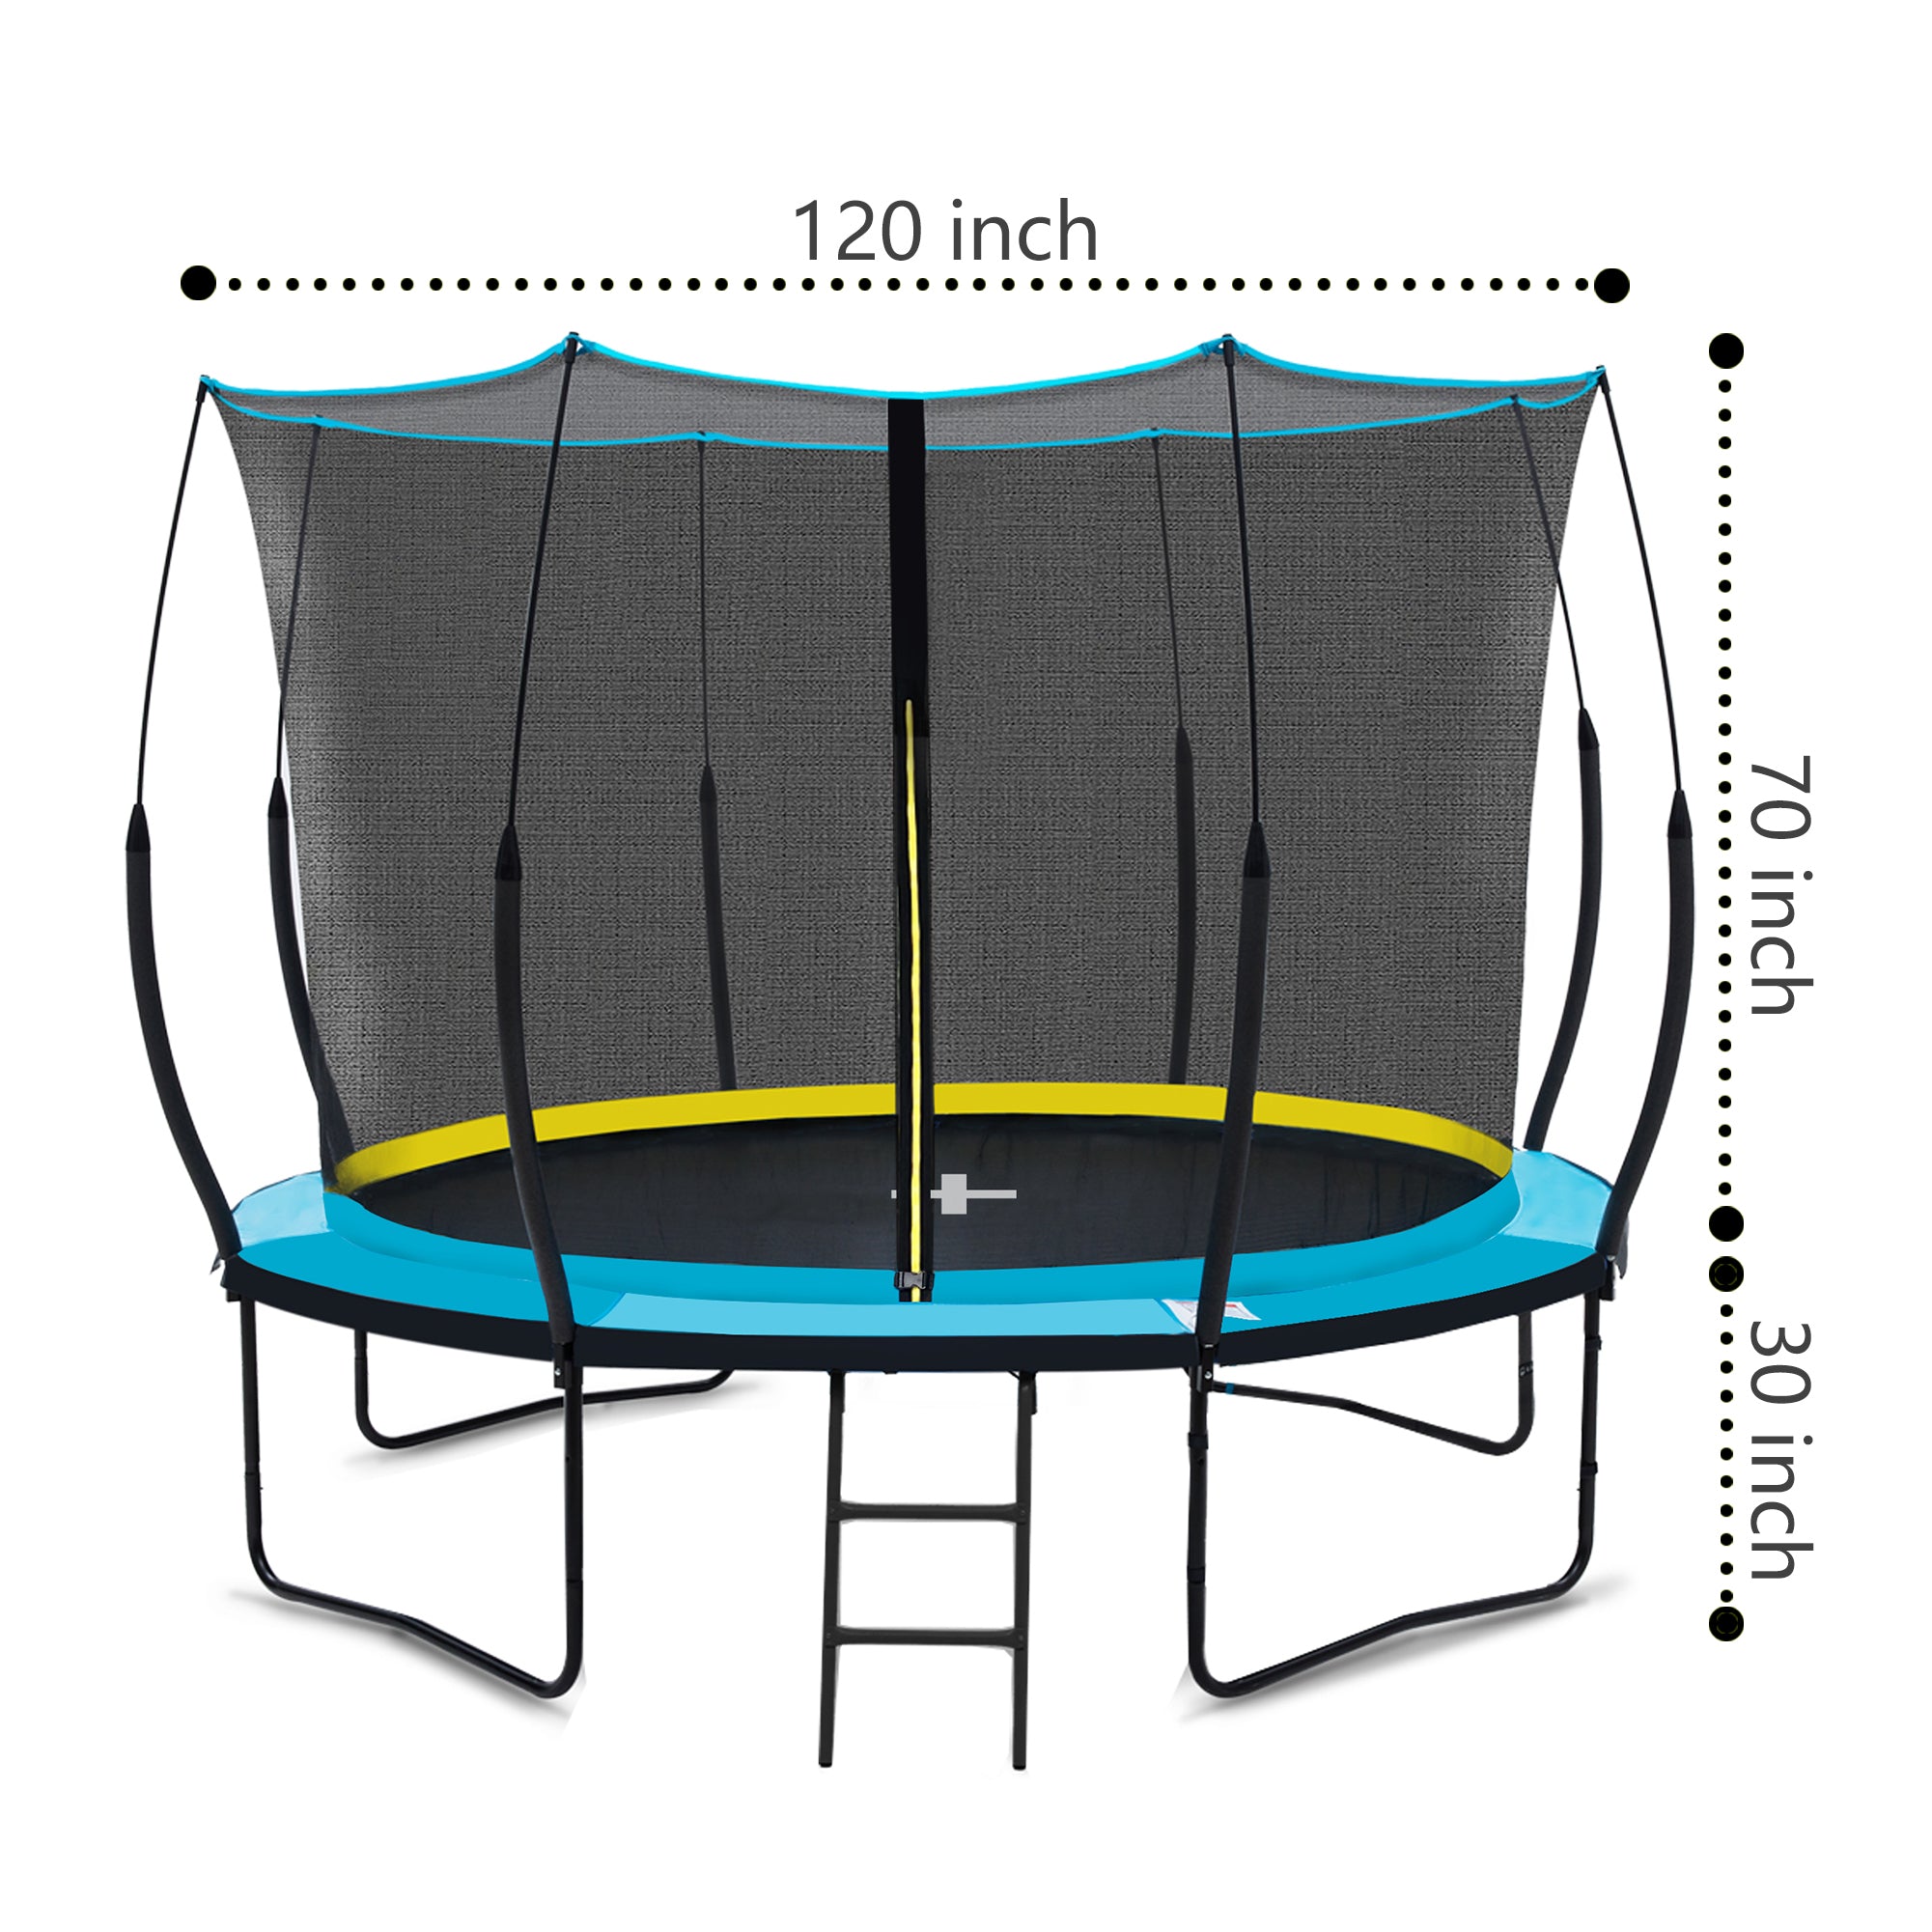 YC 10FT Recreational Trampolines with Enclosure for blue-steel